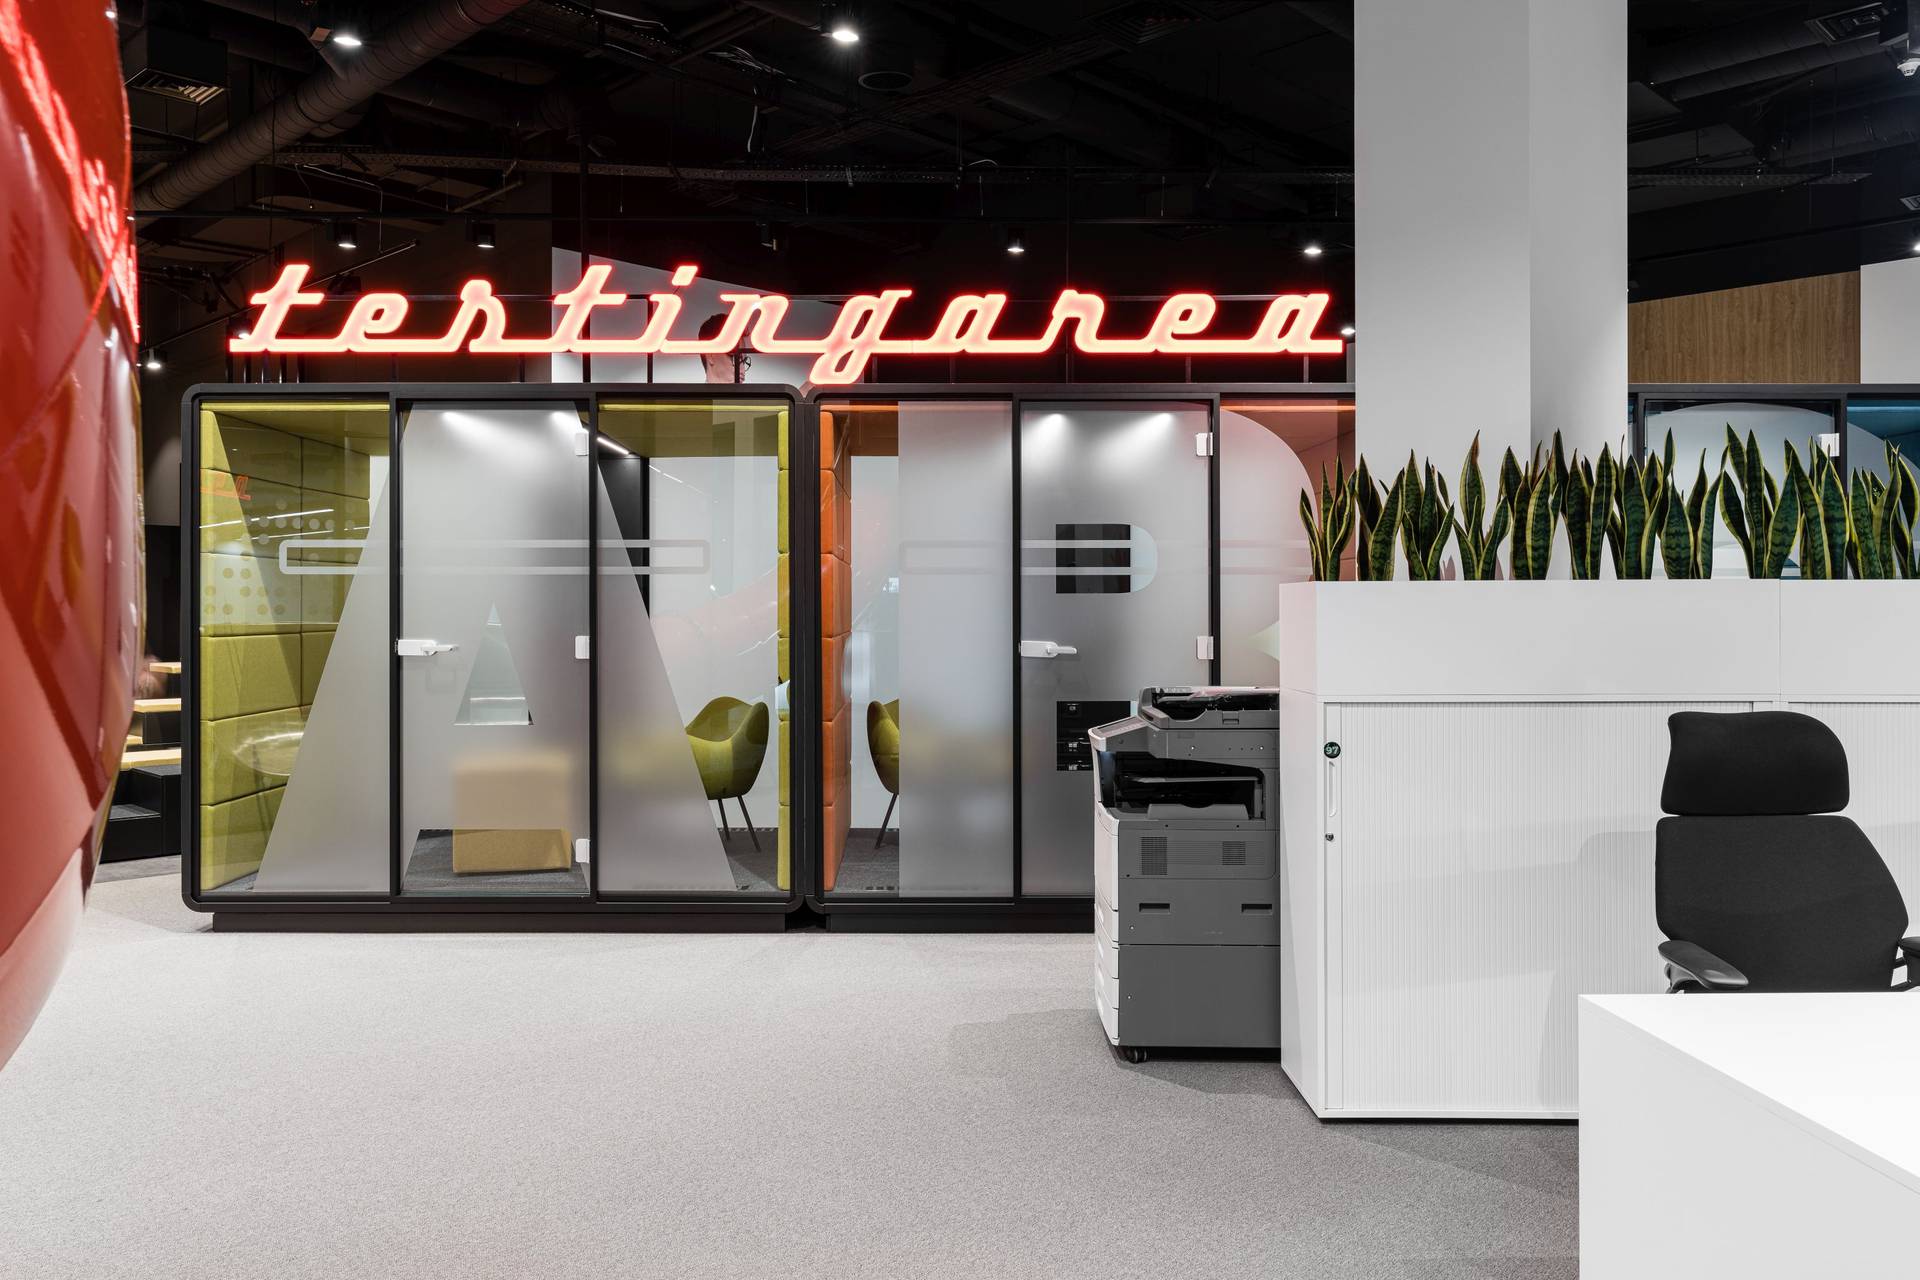 Six inventive ways to make use of acoustic work pods in the office space